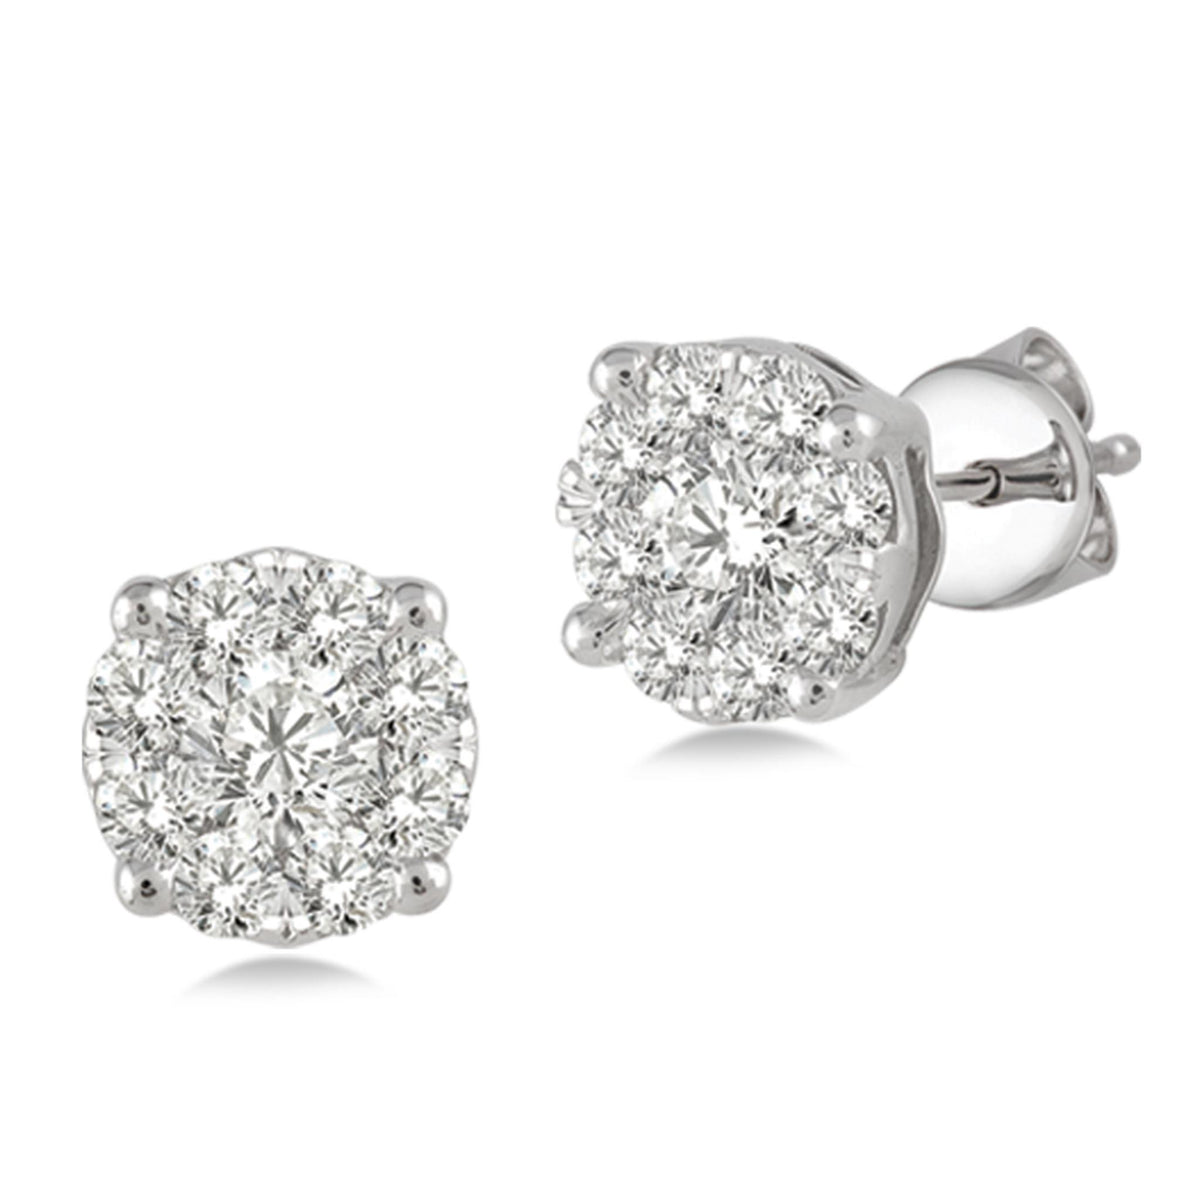 14Kt White Gold Classic Stud Earrings 0.25cttw Natural Diamonds